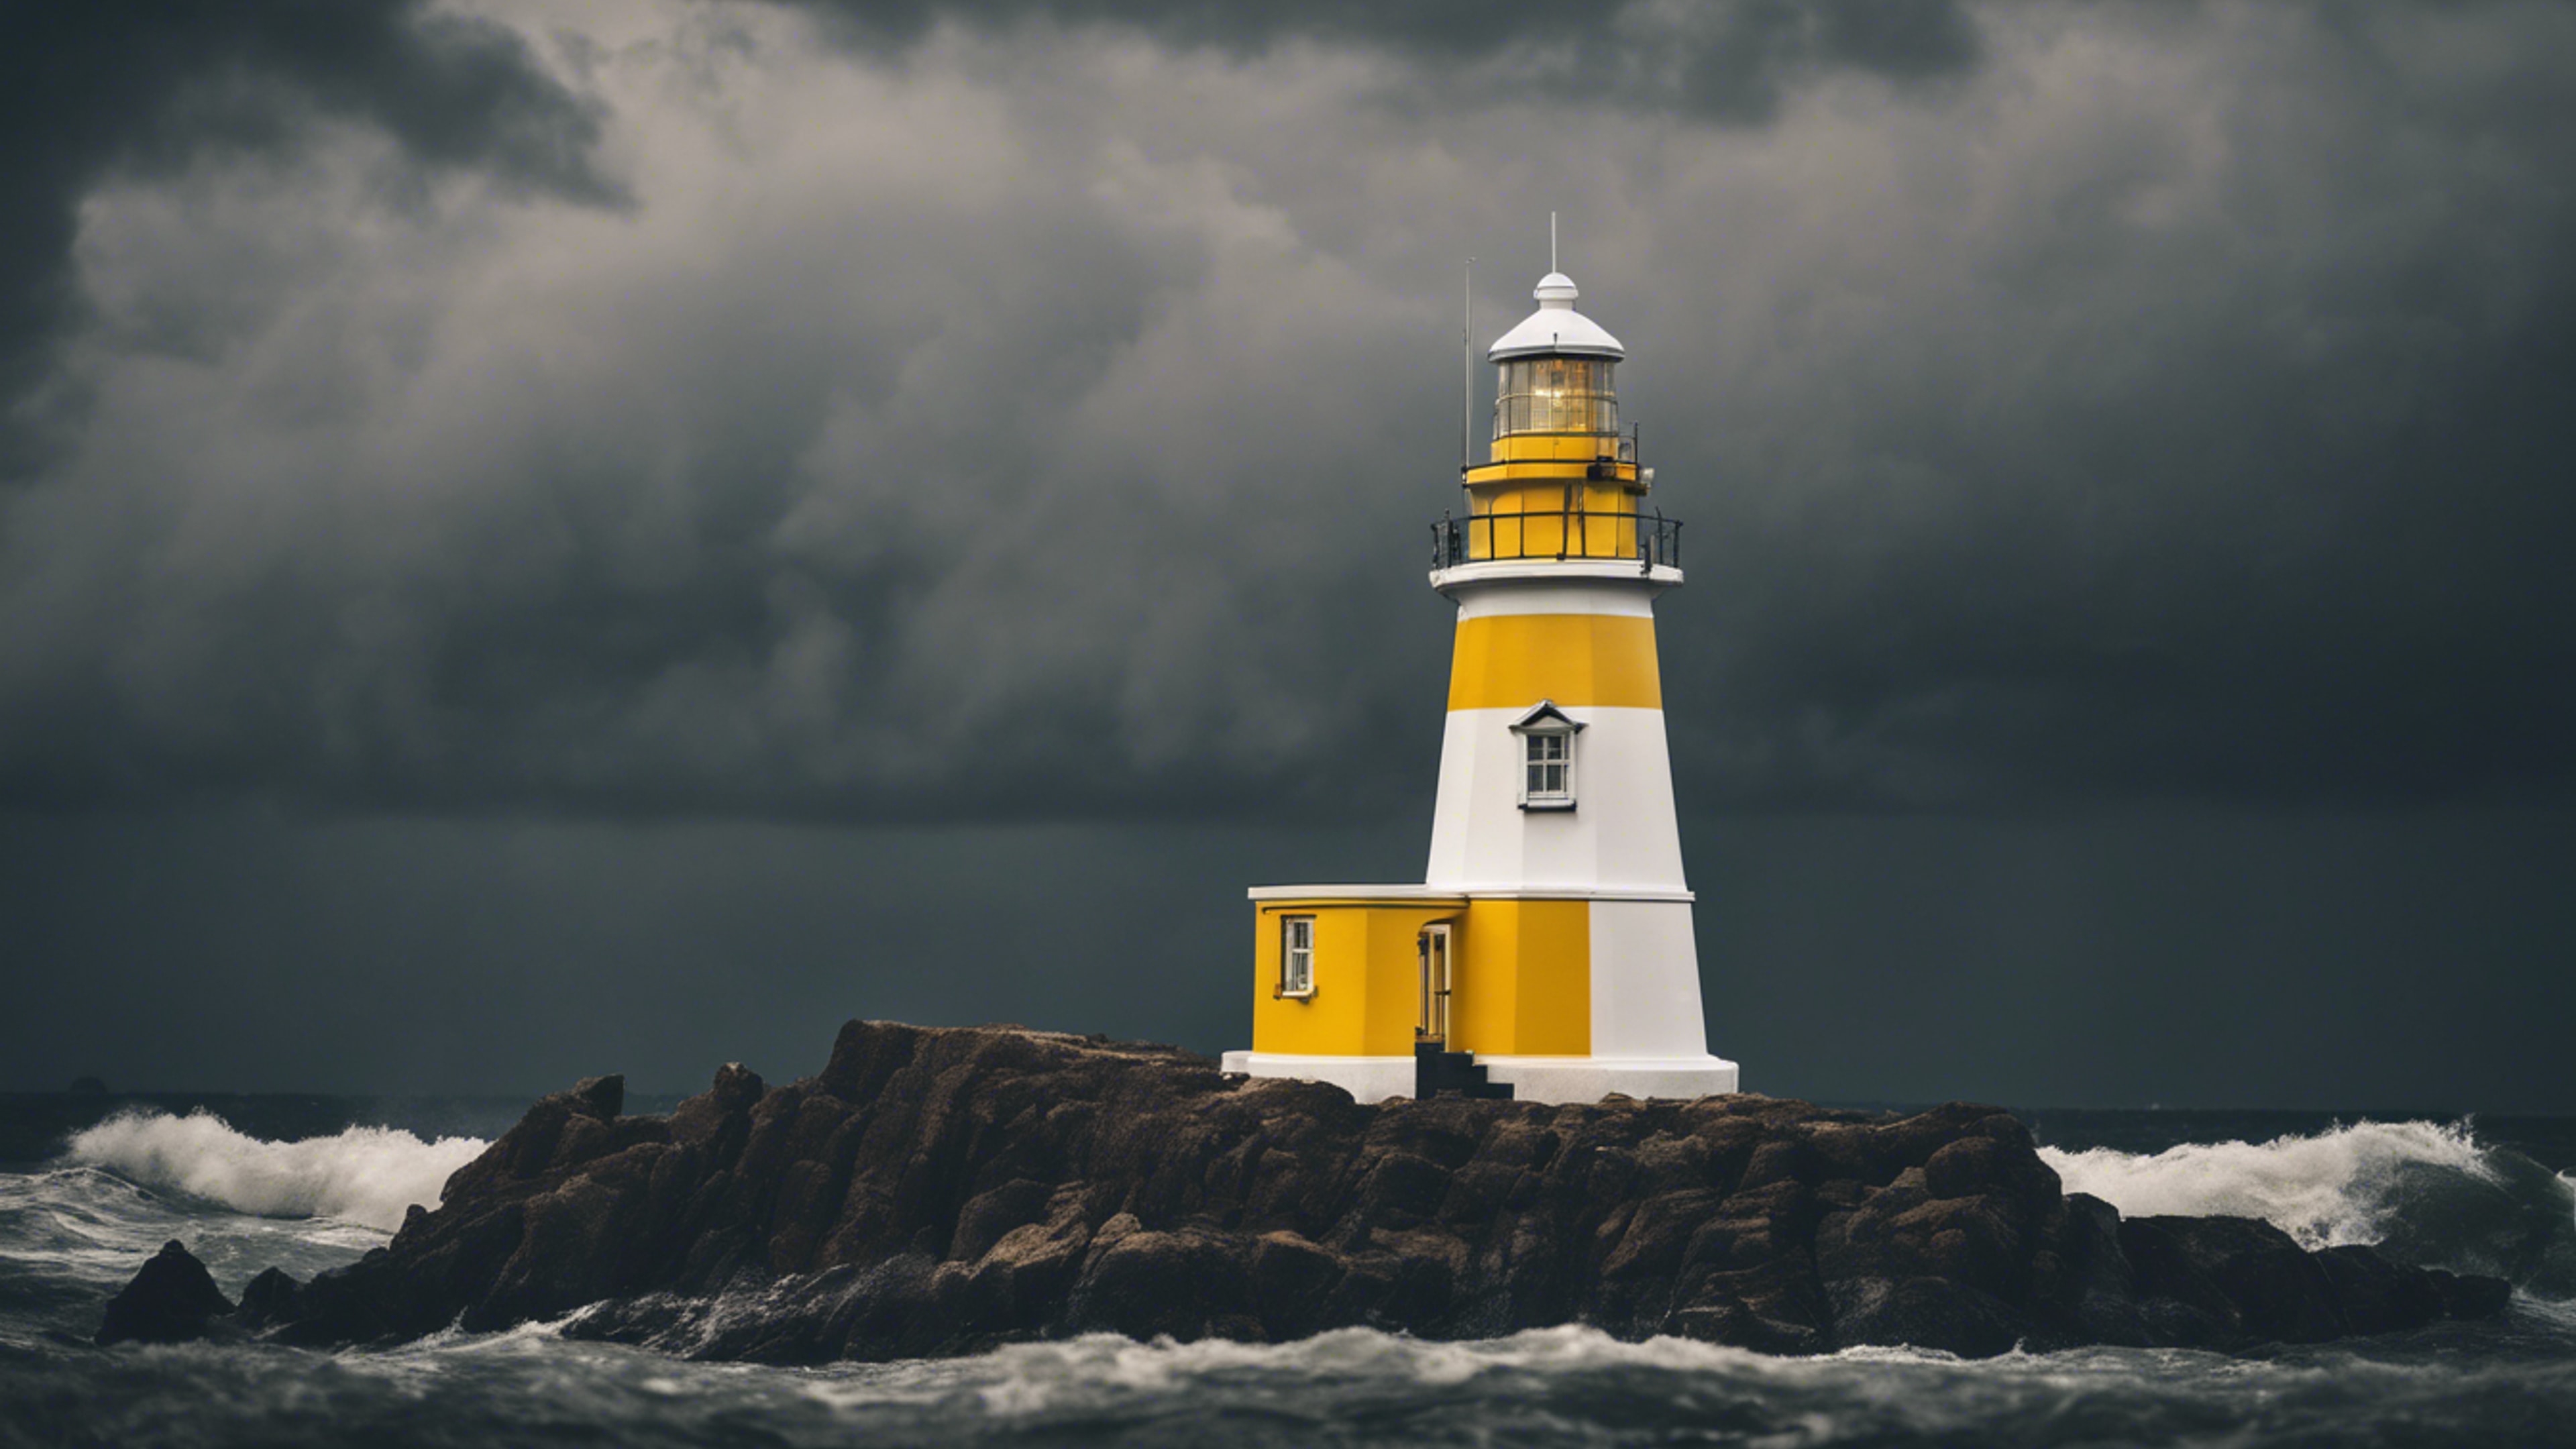 A white and yellow striped lighthouse standing tall against a stormy dark sky. Ταπετσαρία[29fc73b96f634852baf9]